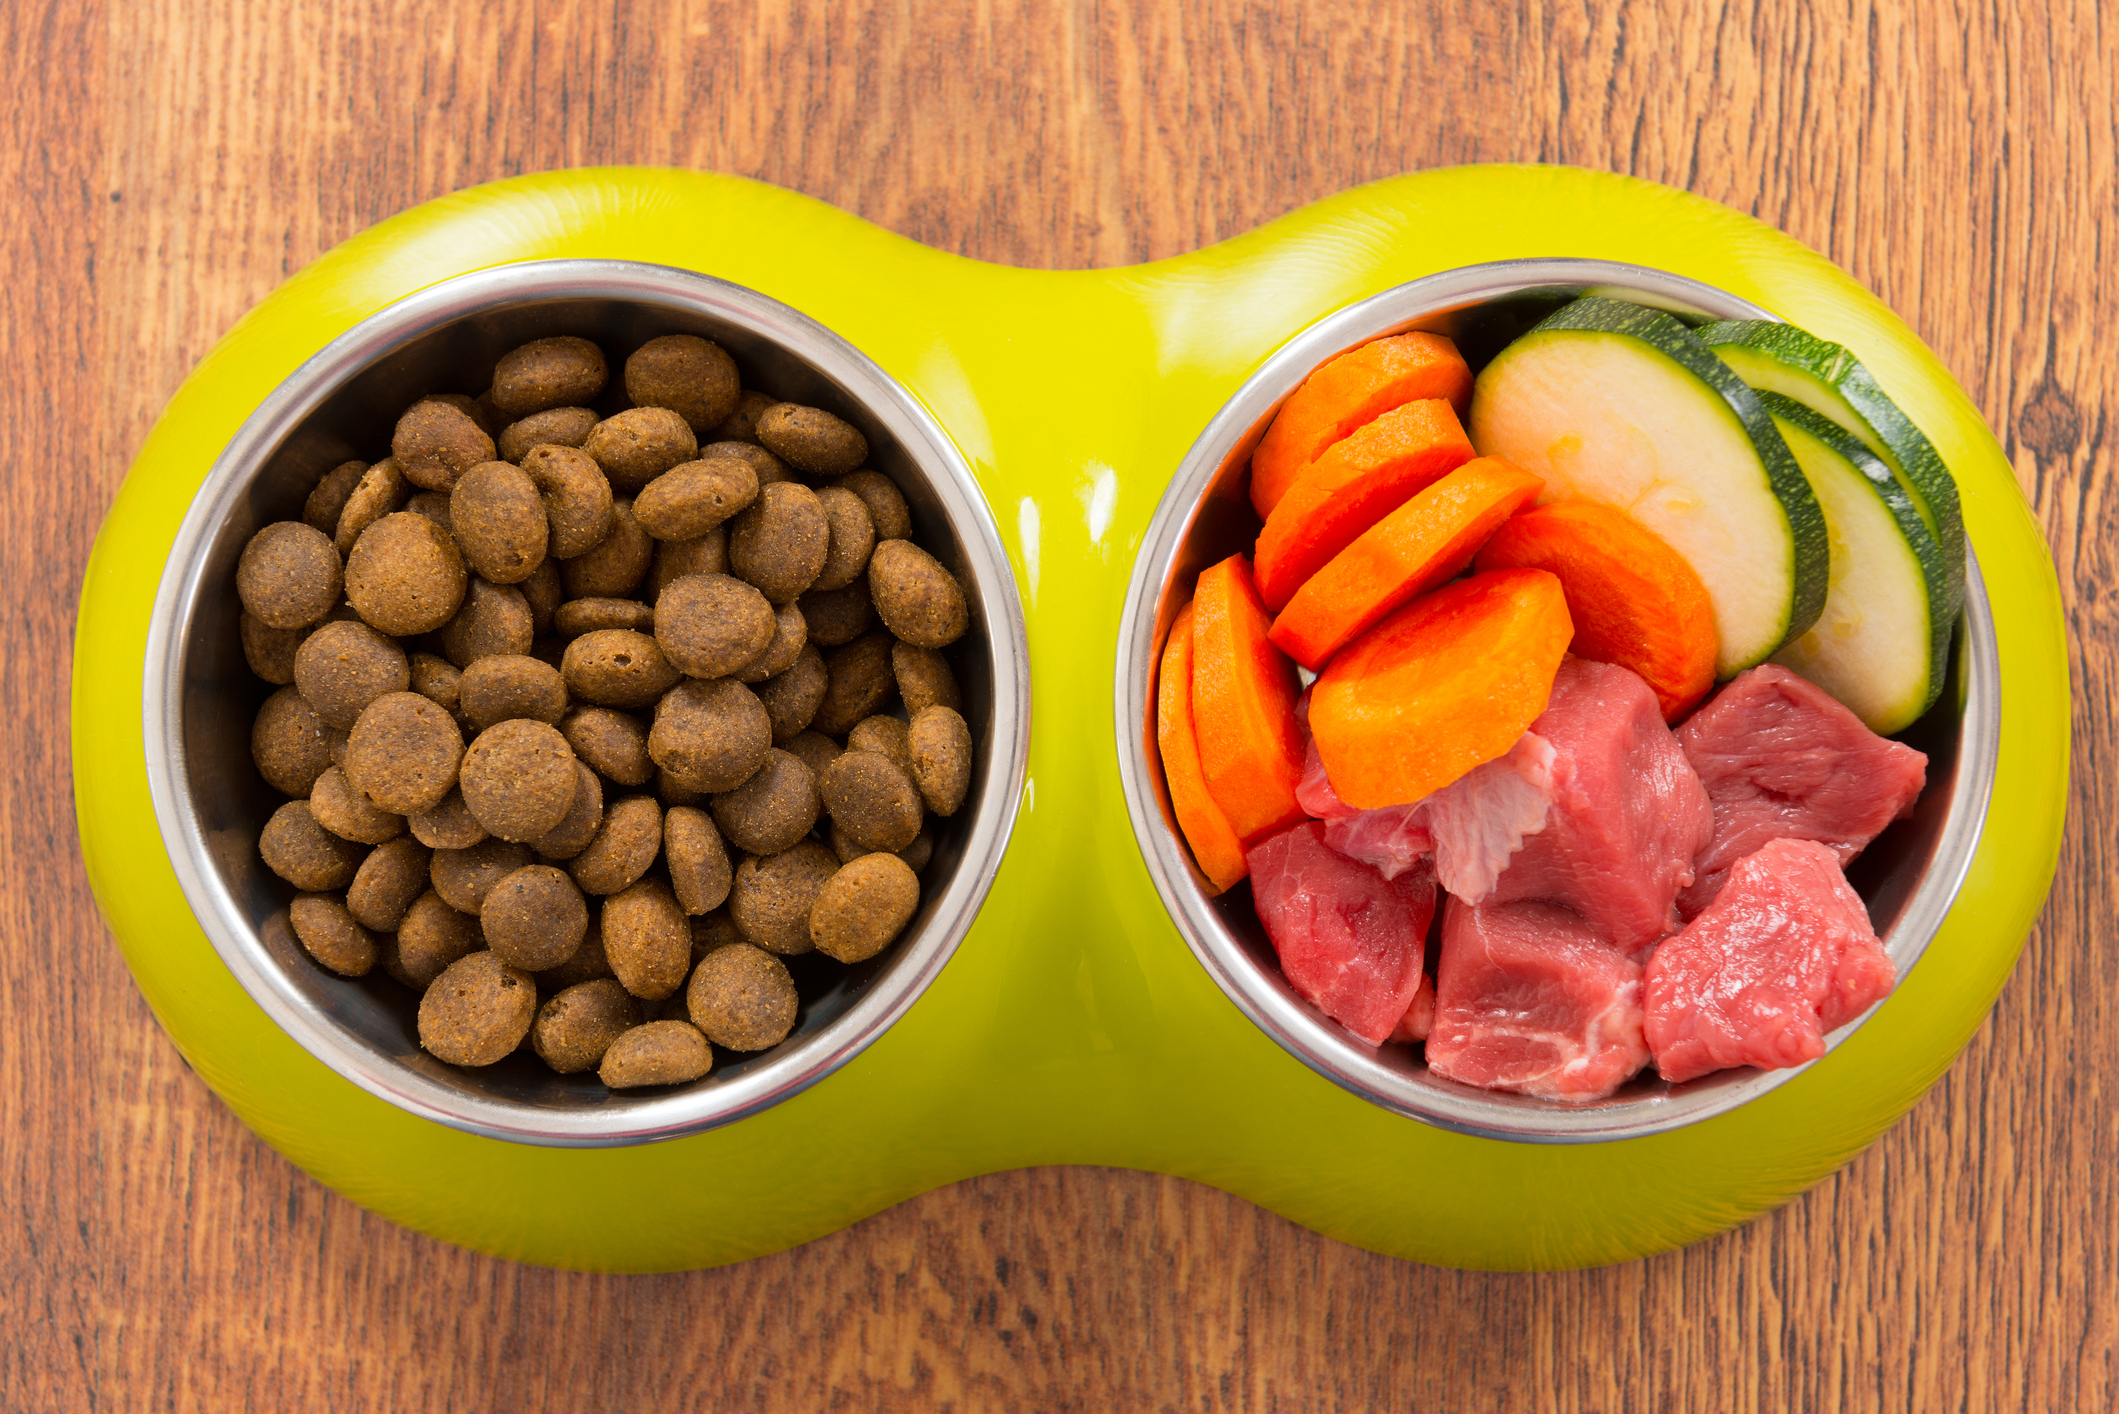 Two dog food bowls, one with kibble and the other containing raw meat and vegetables